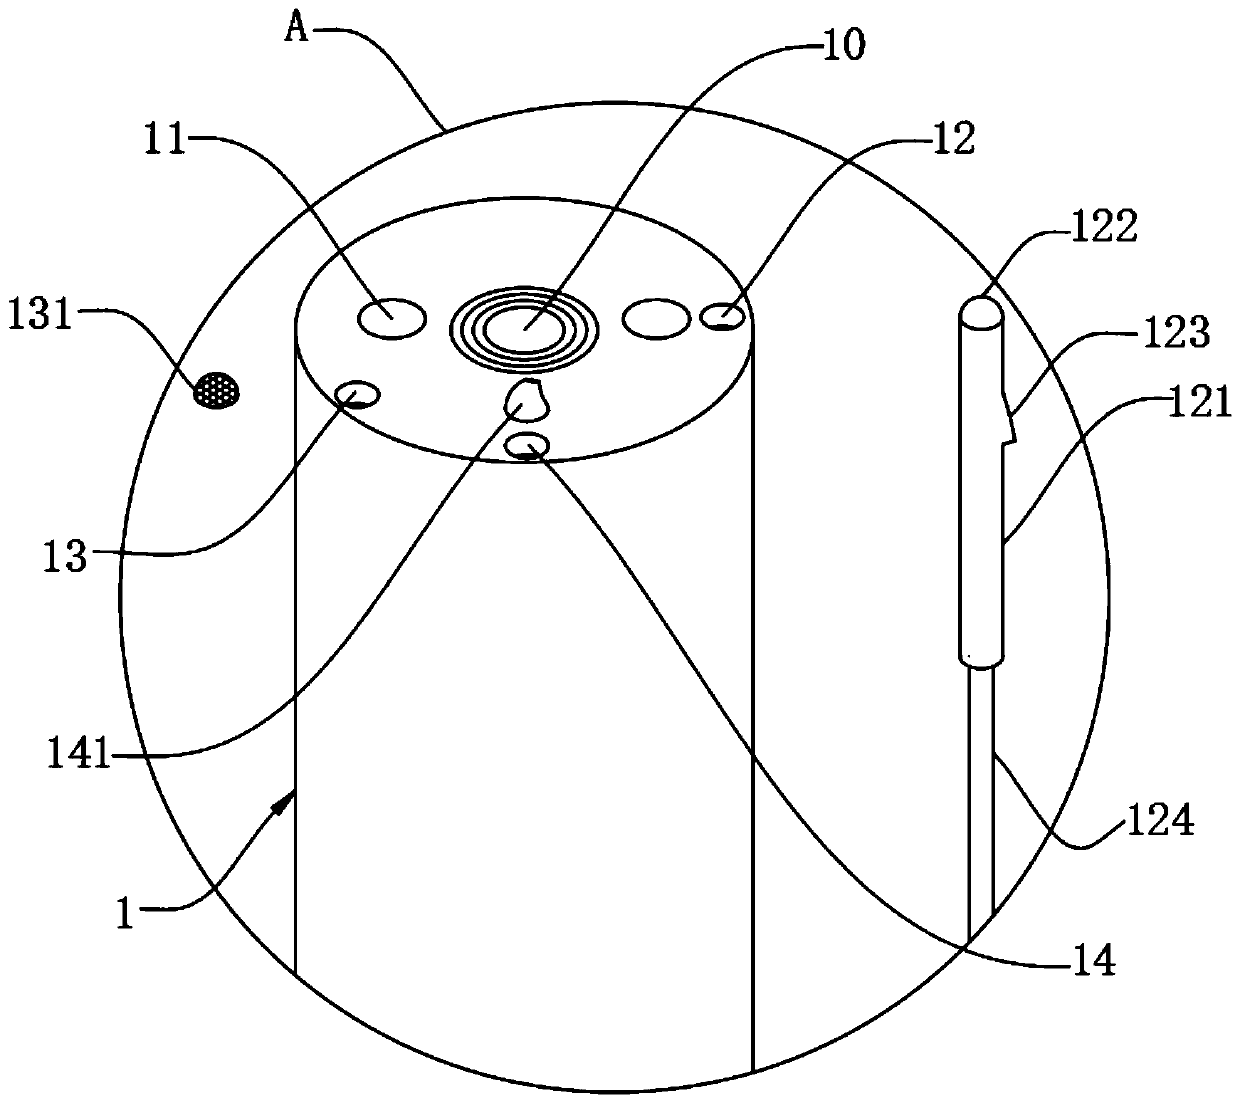 Endoscopic tumor detection carrier device